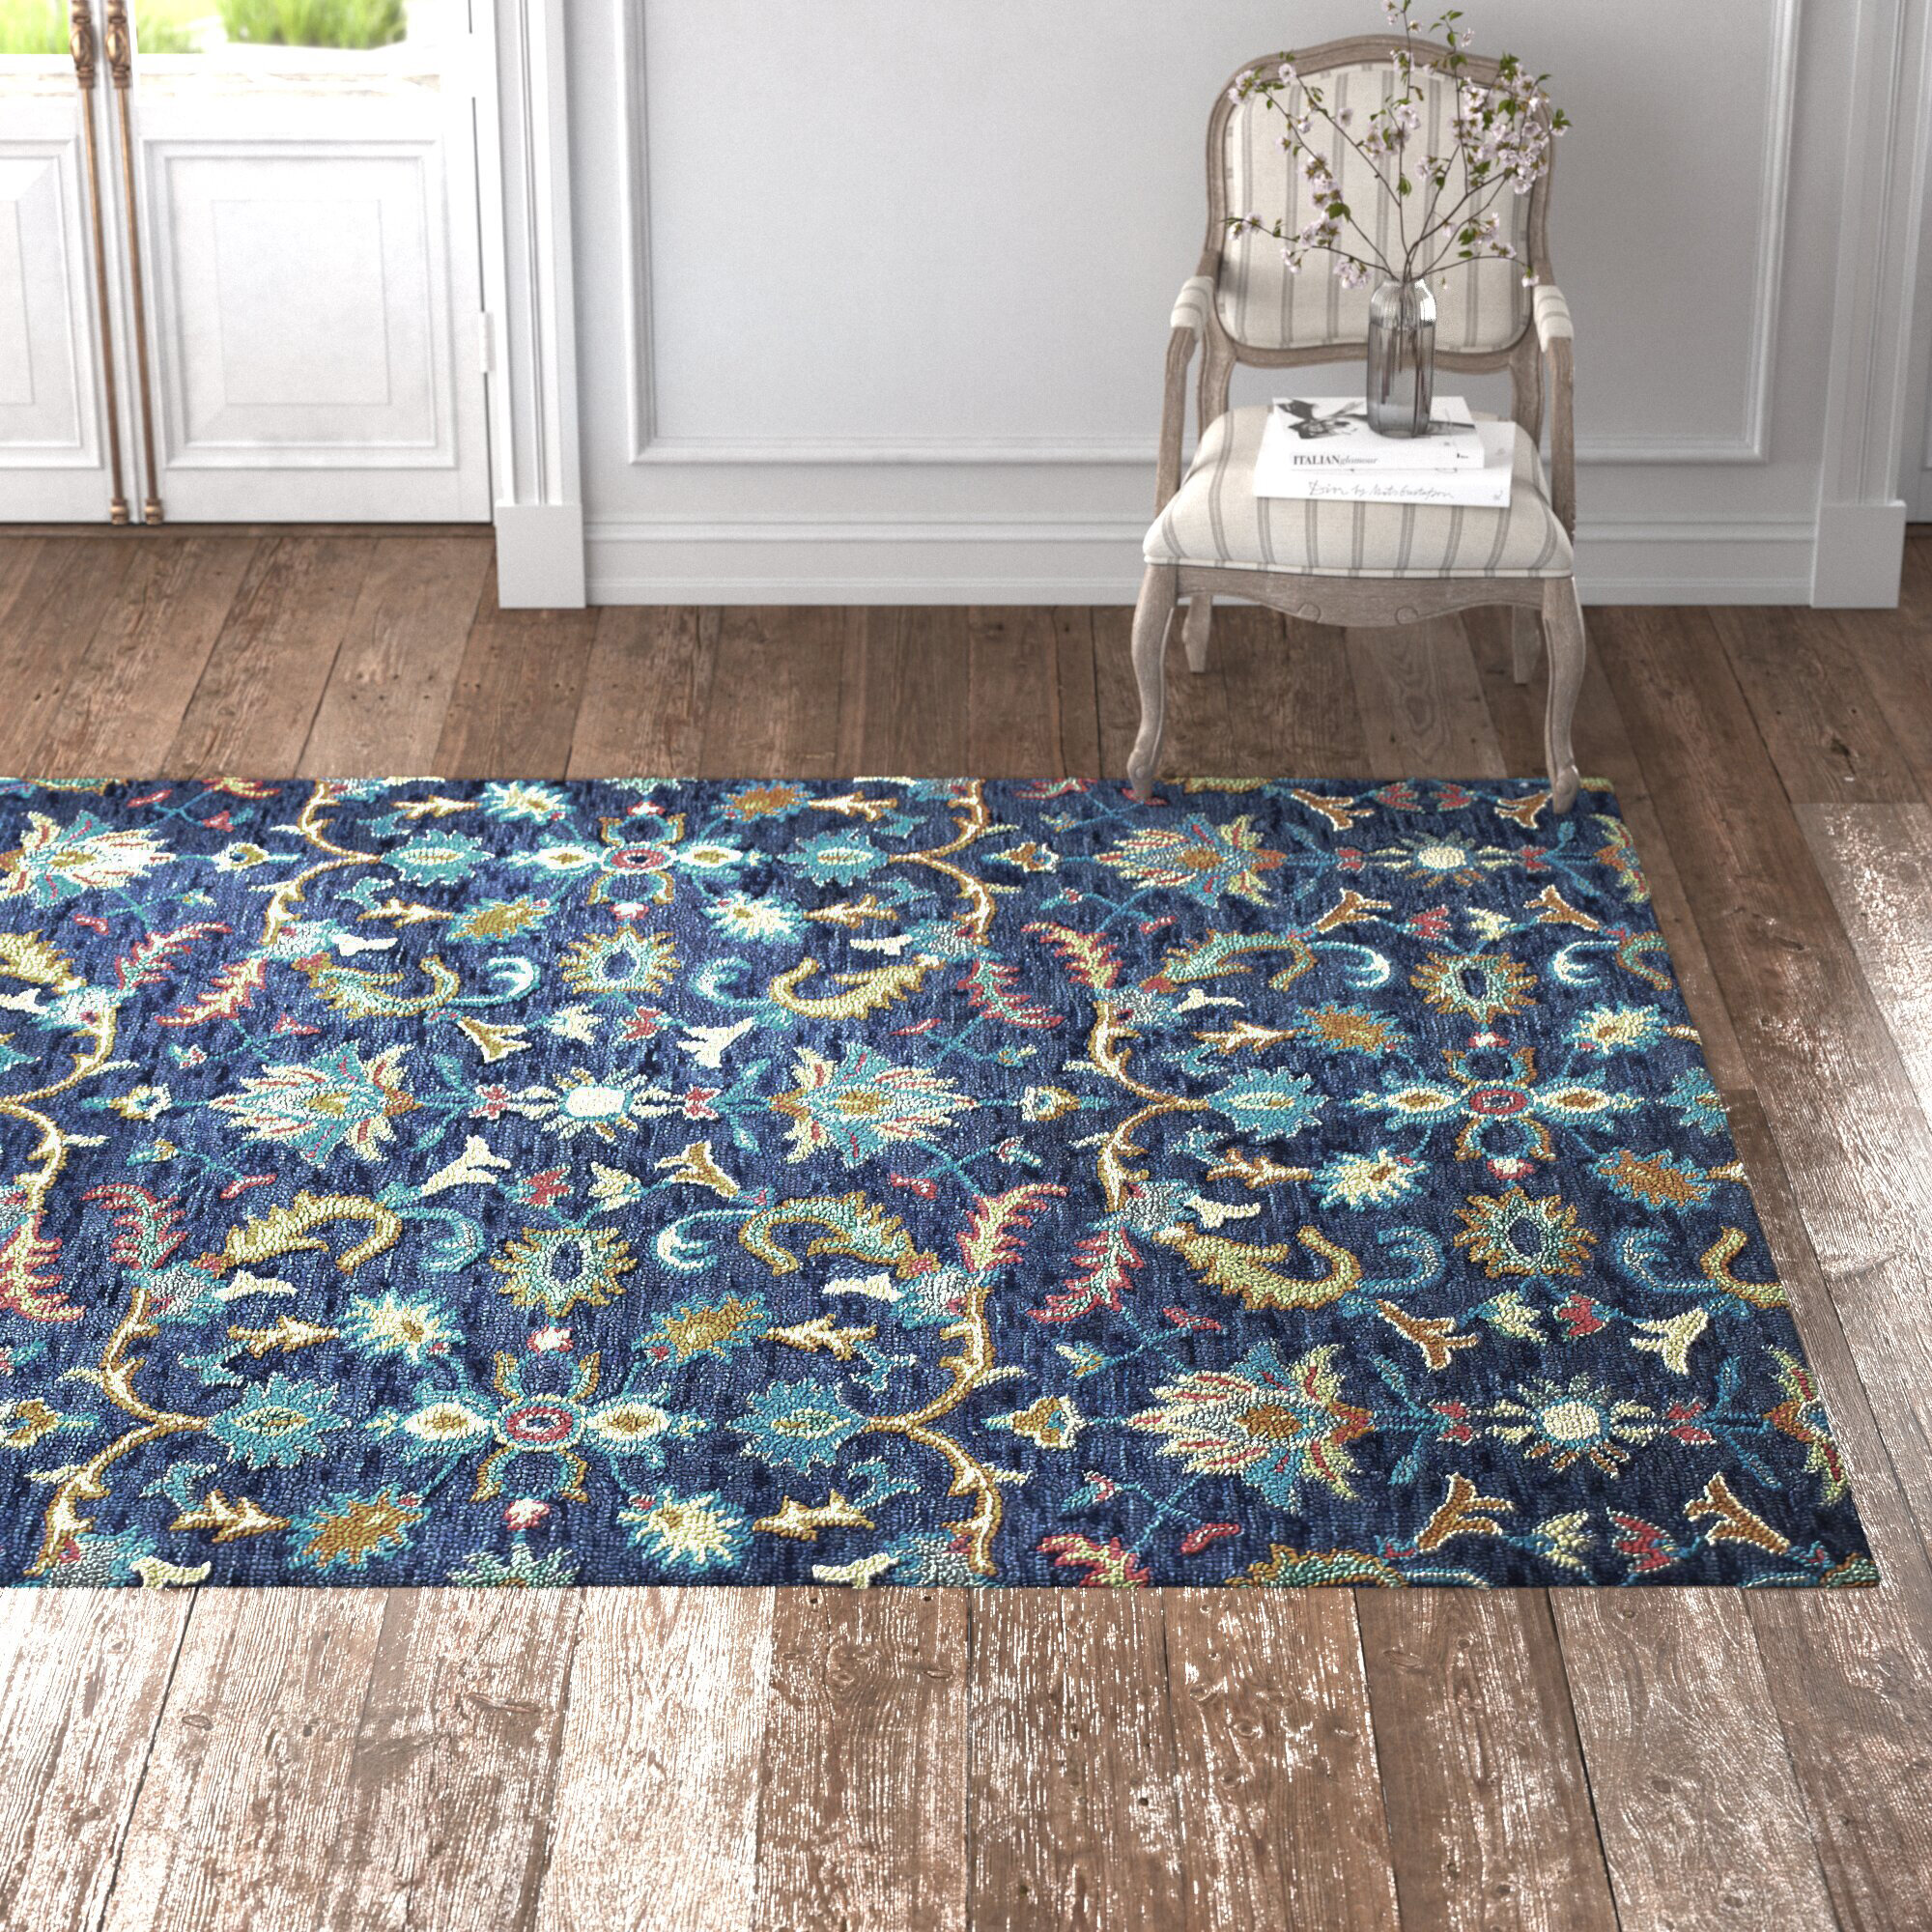 Blue & White Rose Floral Hand Tufted 100% Wool Soft Area Rug